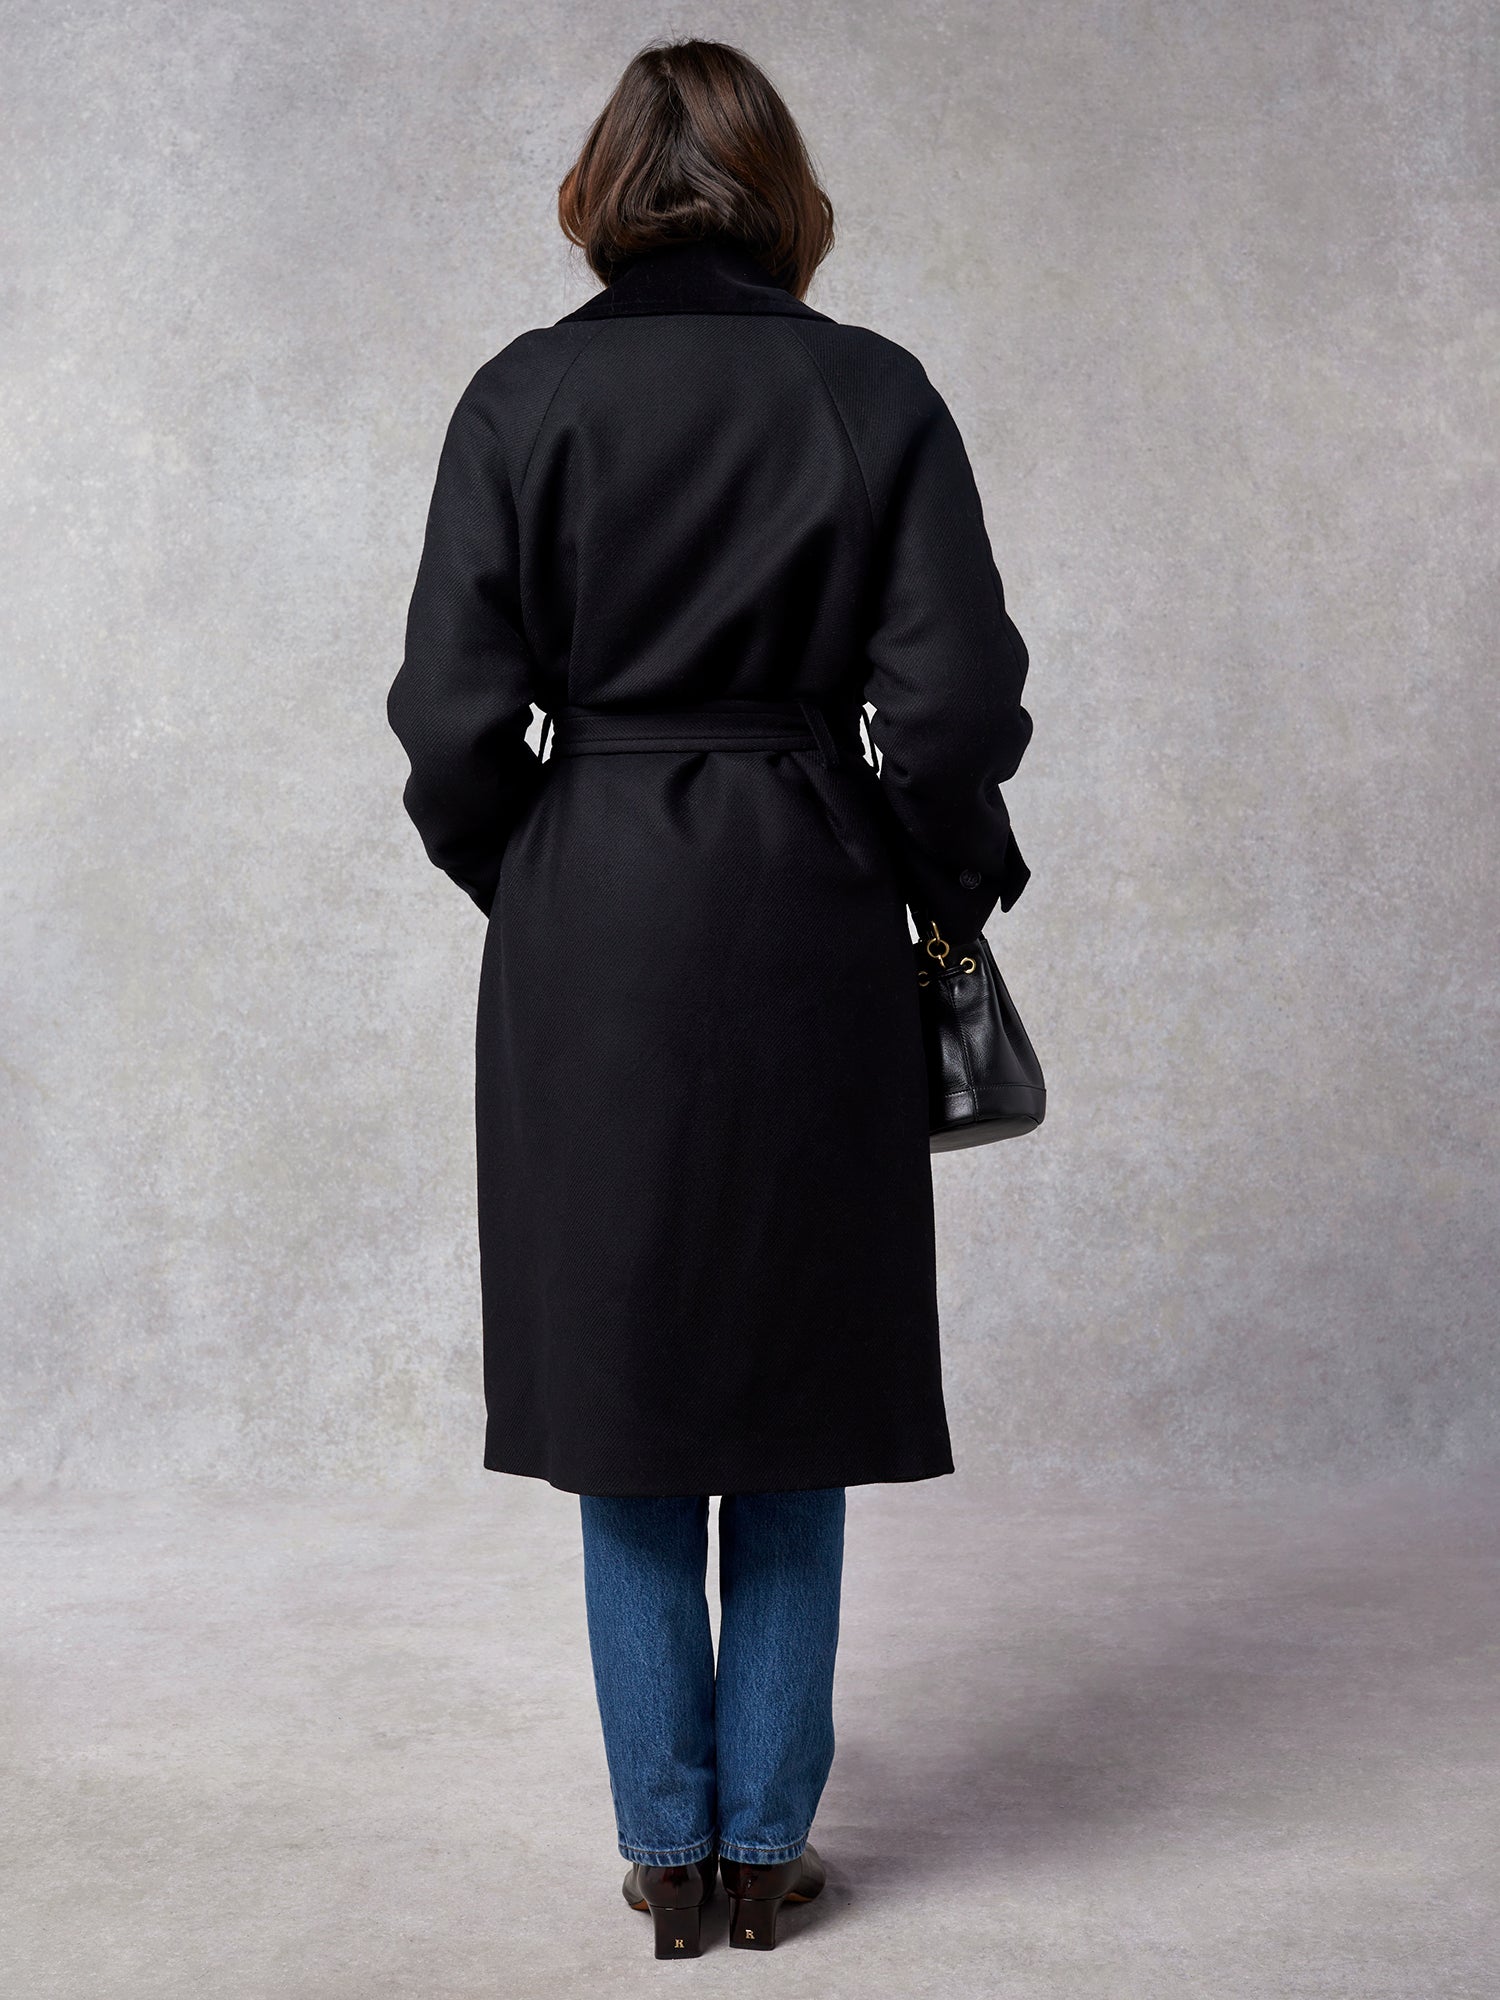 Oversized double-breasted and belted black wool coat | Rouje